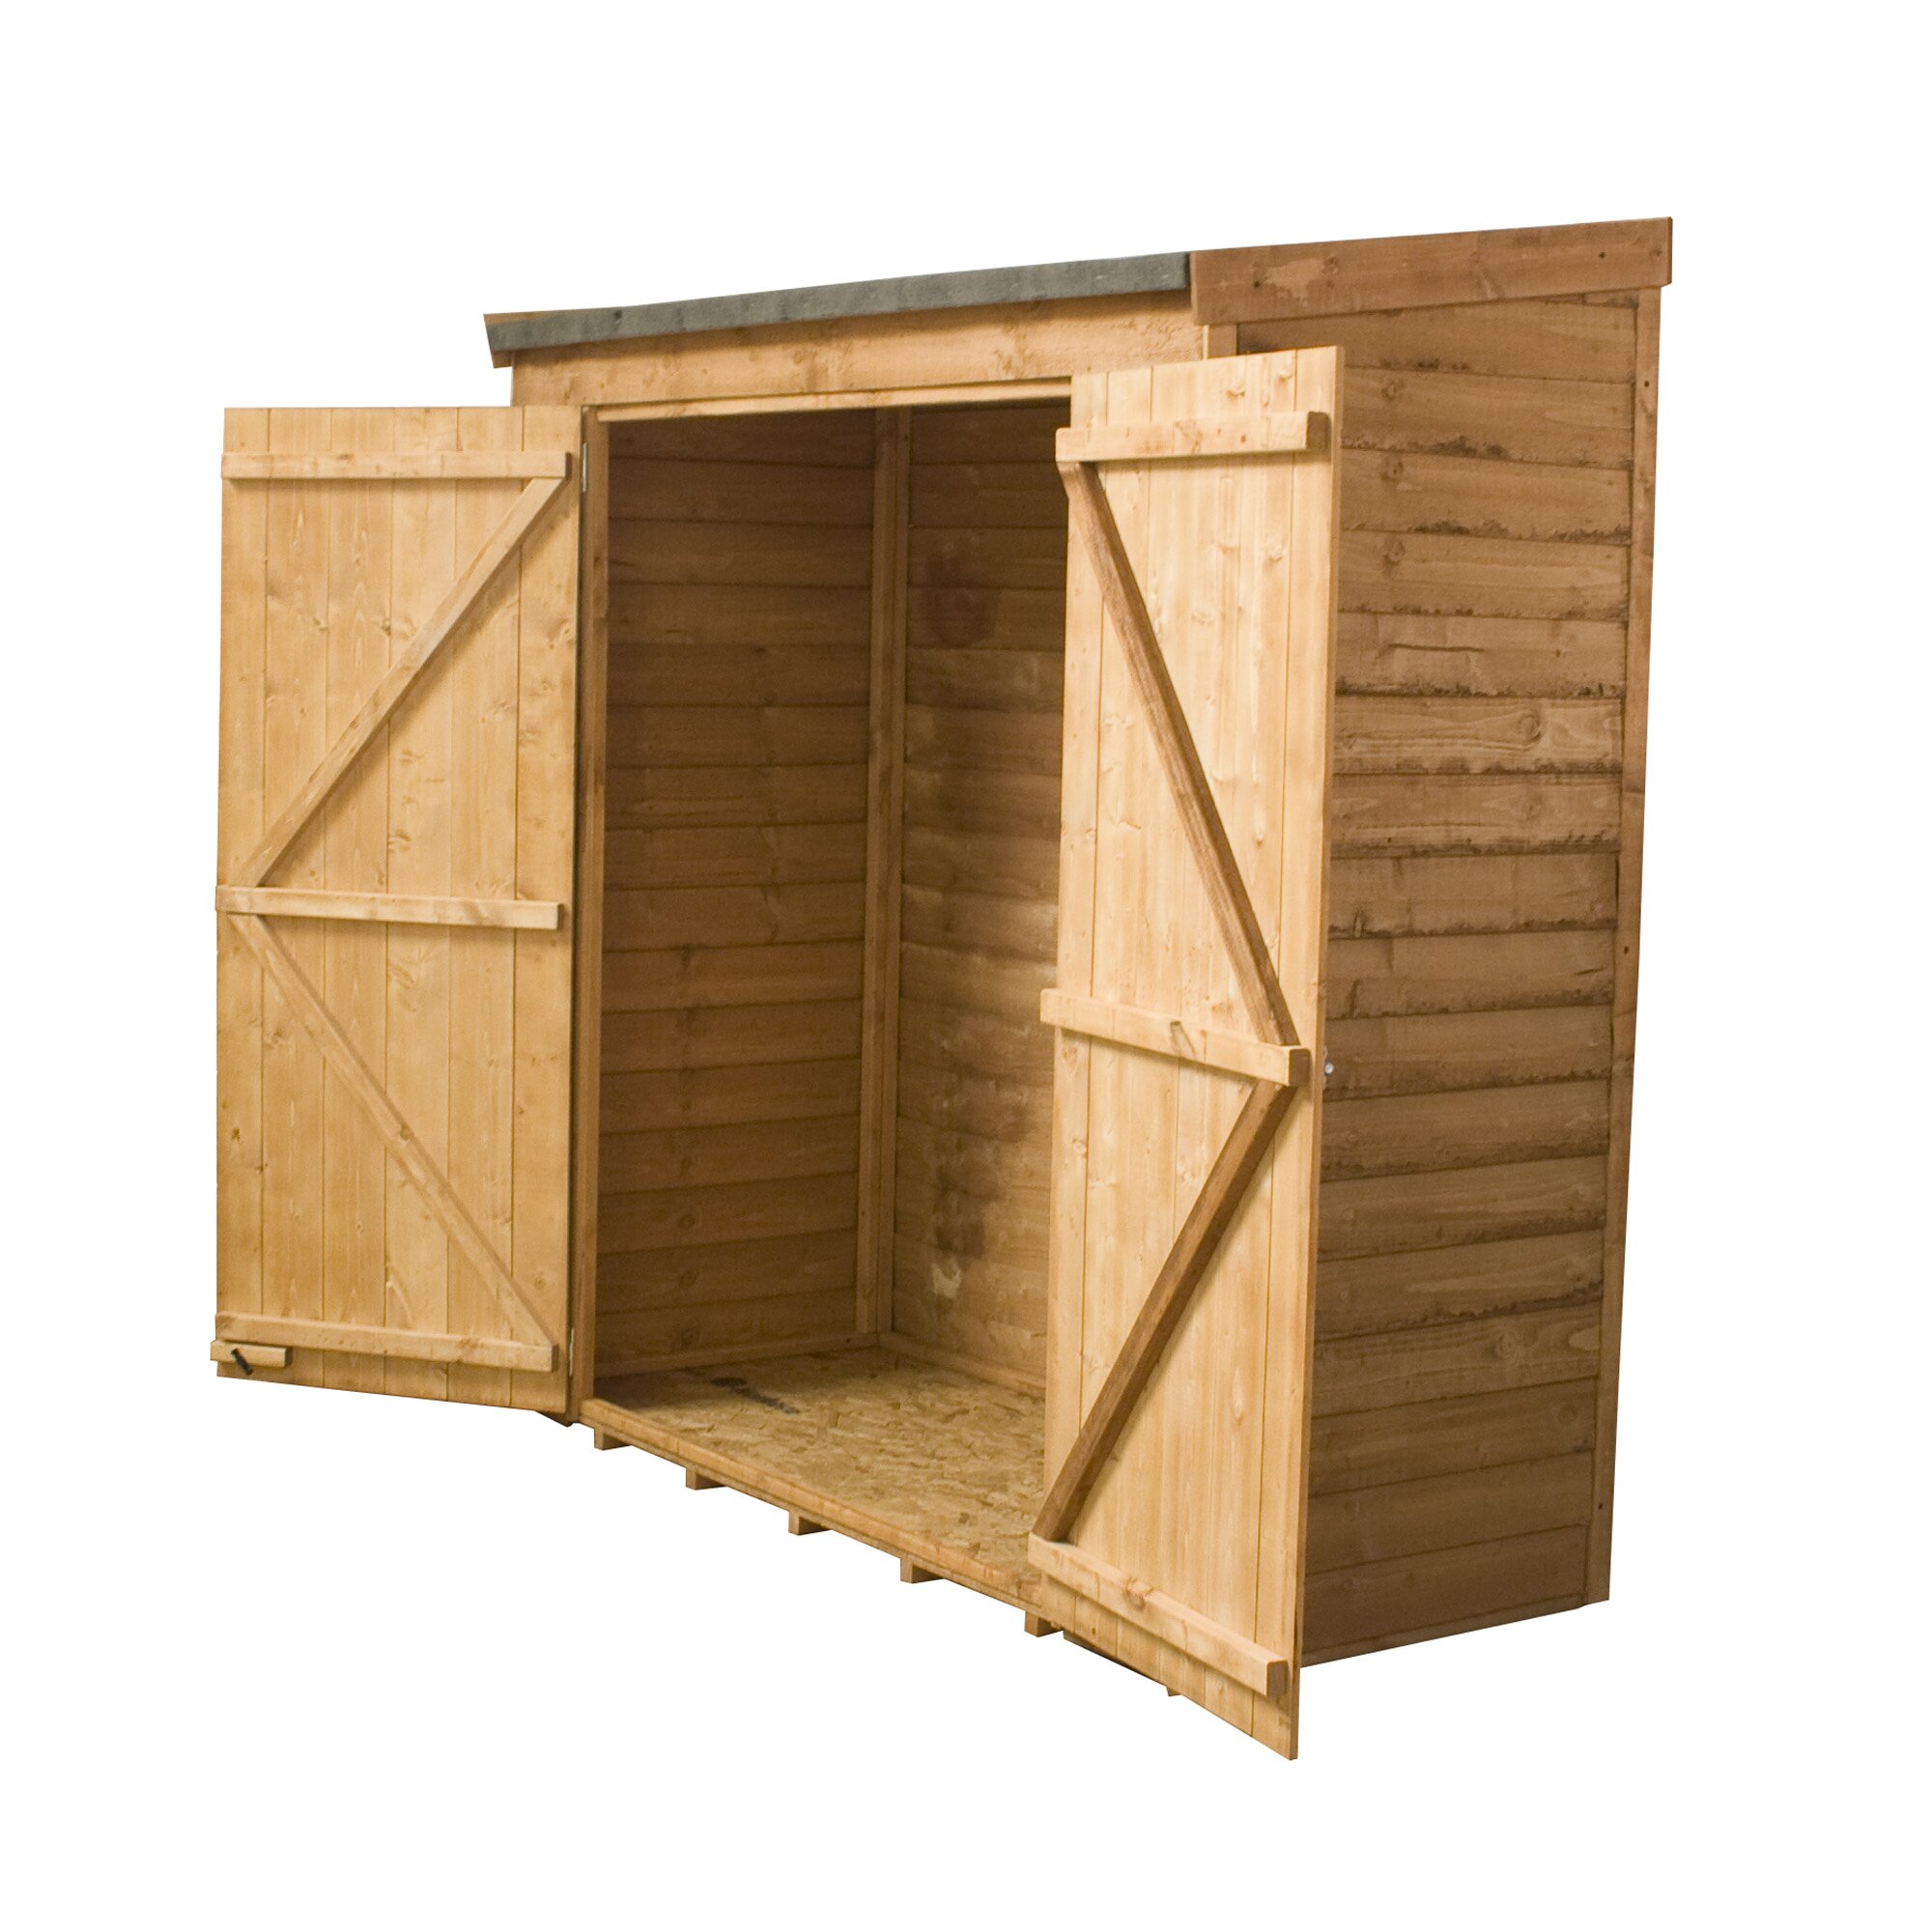 Mercia Garden Products 6 x 3 Wooden Tool Shed &amp; Reviews 